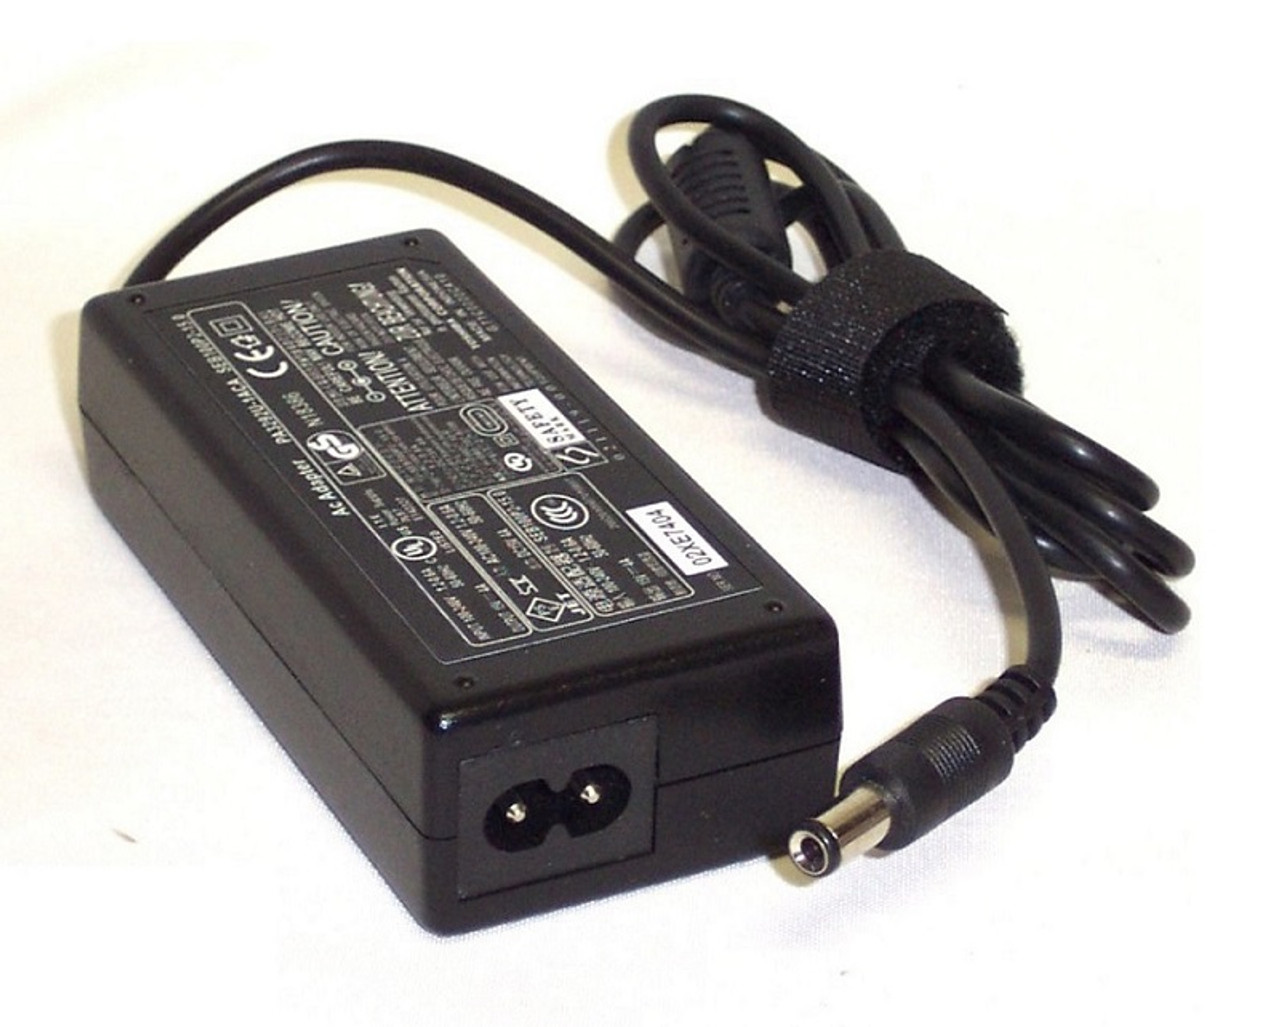 418148-001 - HP 3 In 1 Nas Docking Station with 180-Watts AC Adapter for Laptop Pc